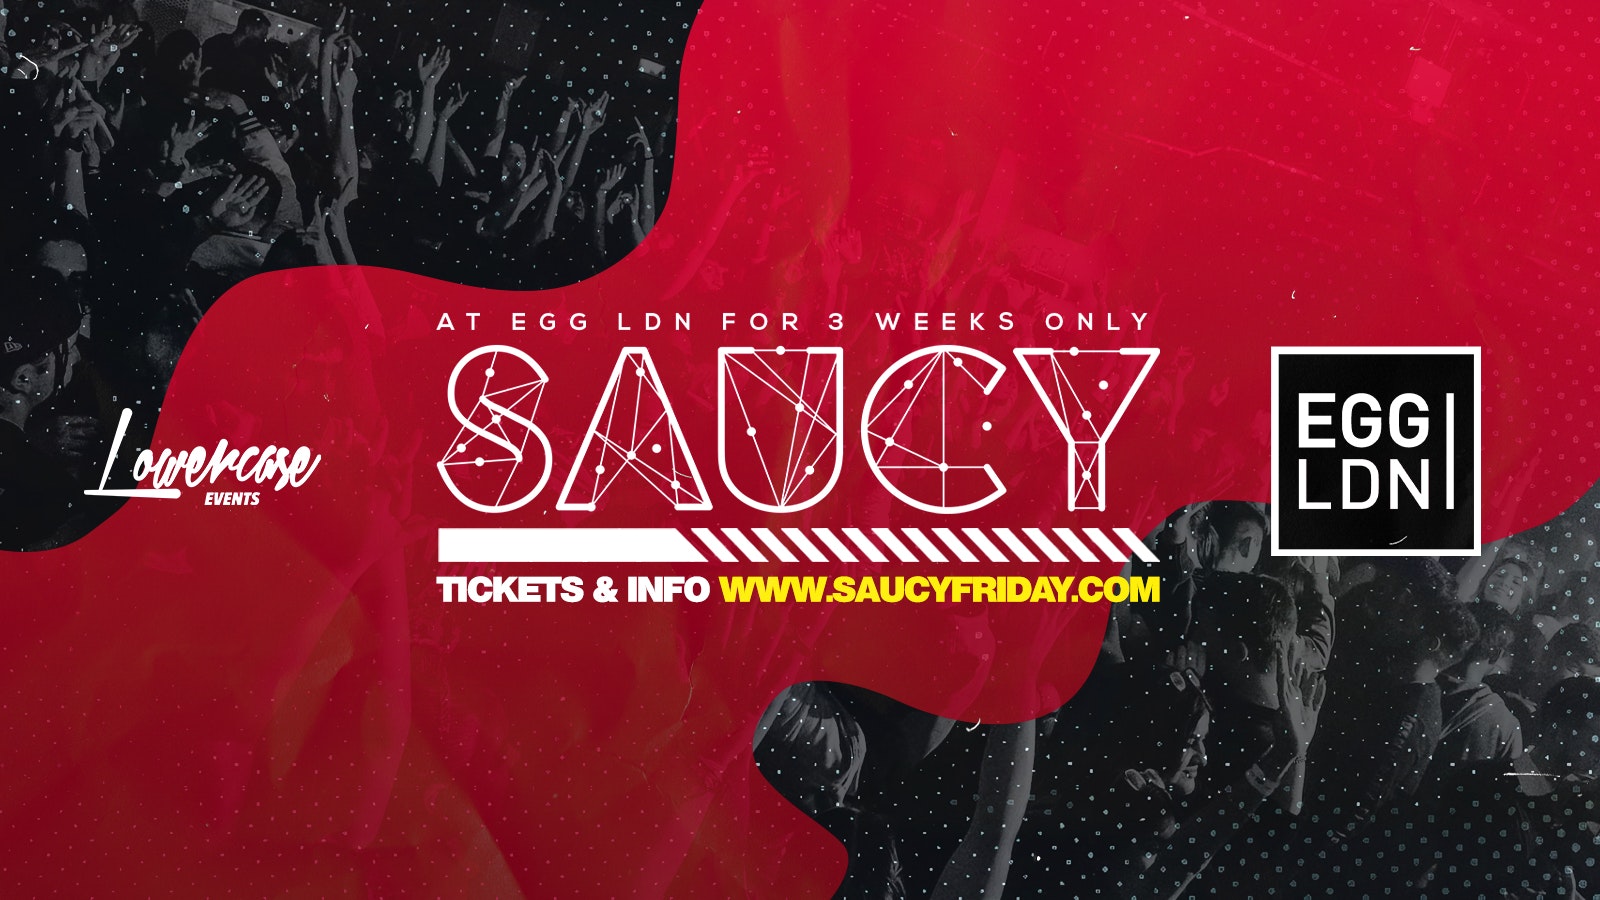 END OF YEAR FINALÉ Saucy Fridays 🎉 – London’s Biggest Weekly Student Friday At Egg London ft DJ AR